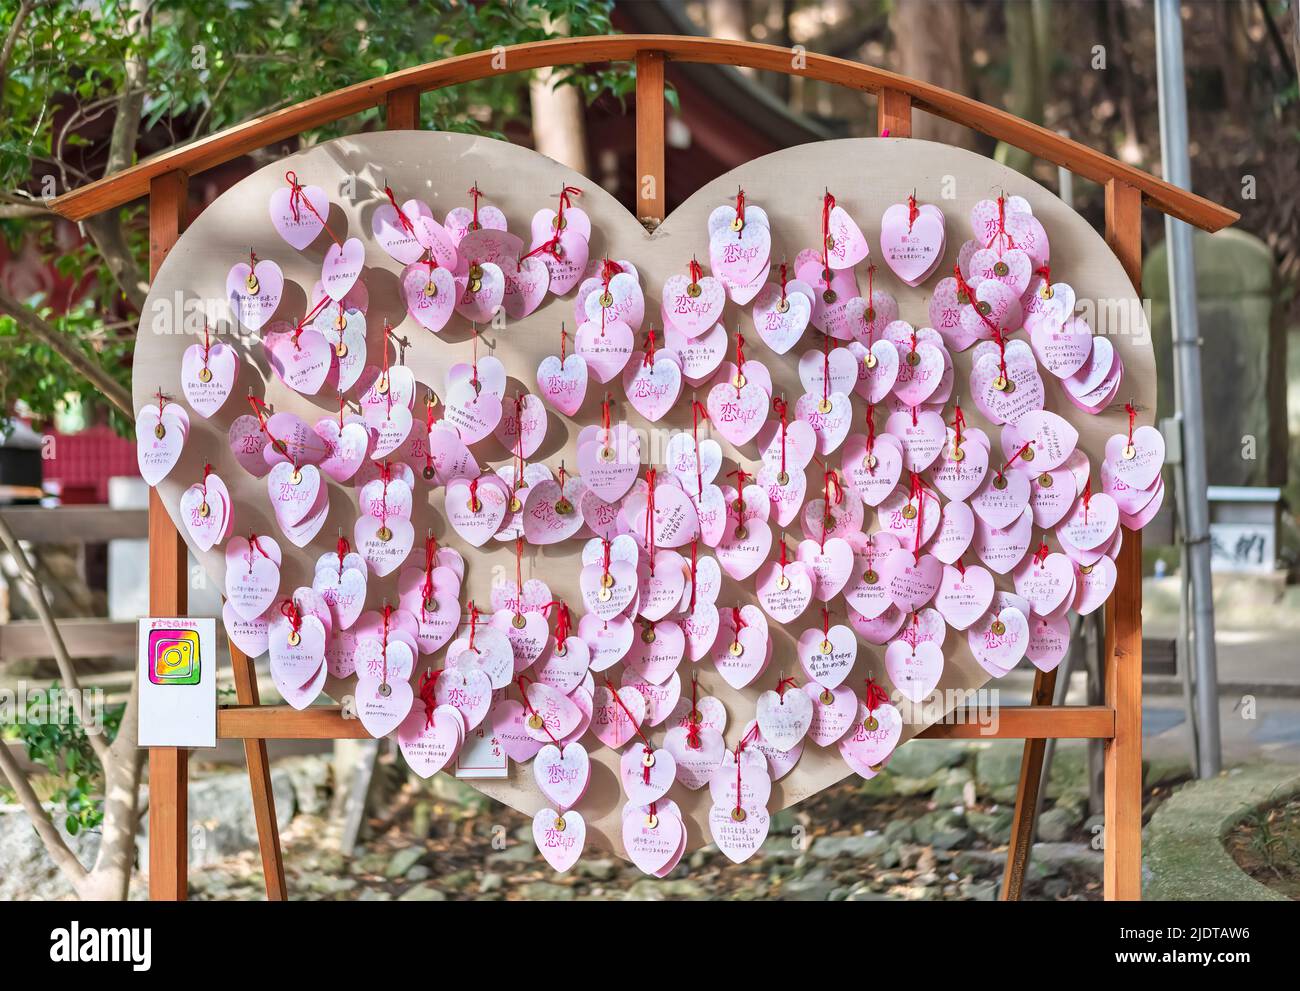 kyushu, japan - december 08 2021: Votive papers shaped as heart with Japanese 5 cents coins called goen meaning matchmaking for the singles who want t Stock Photo